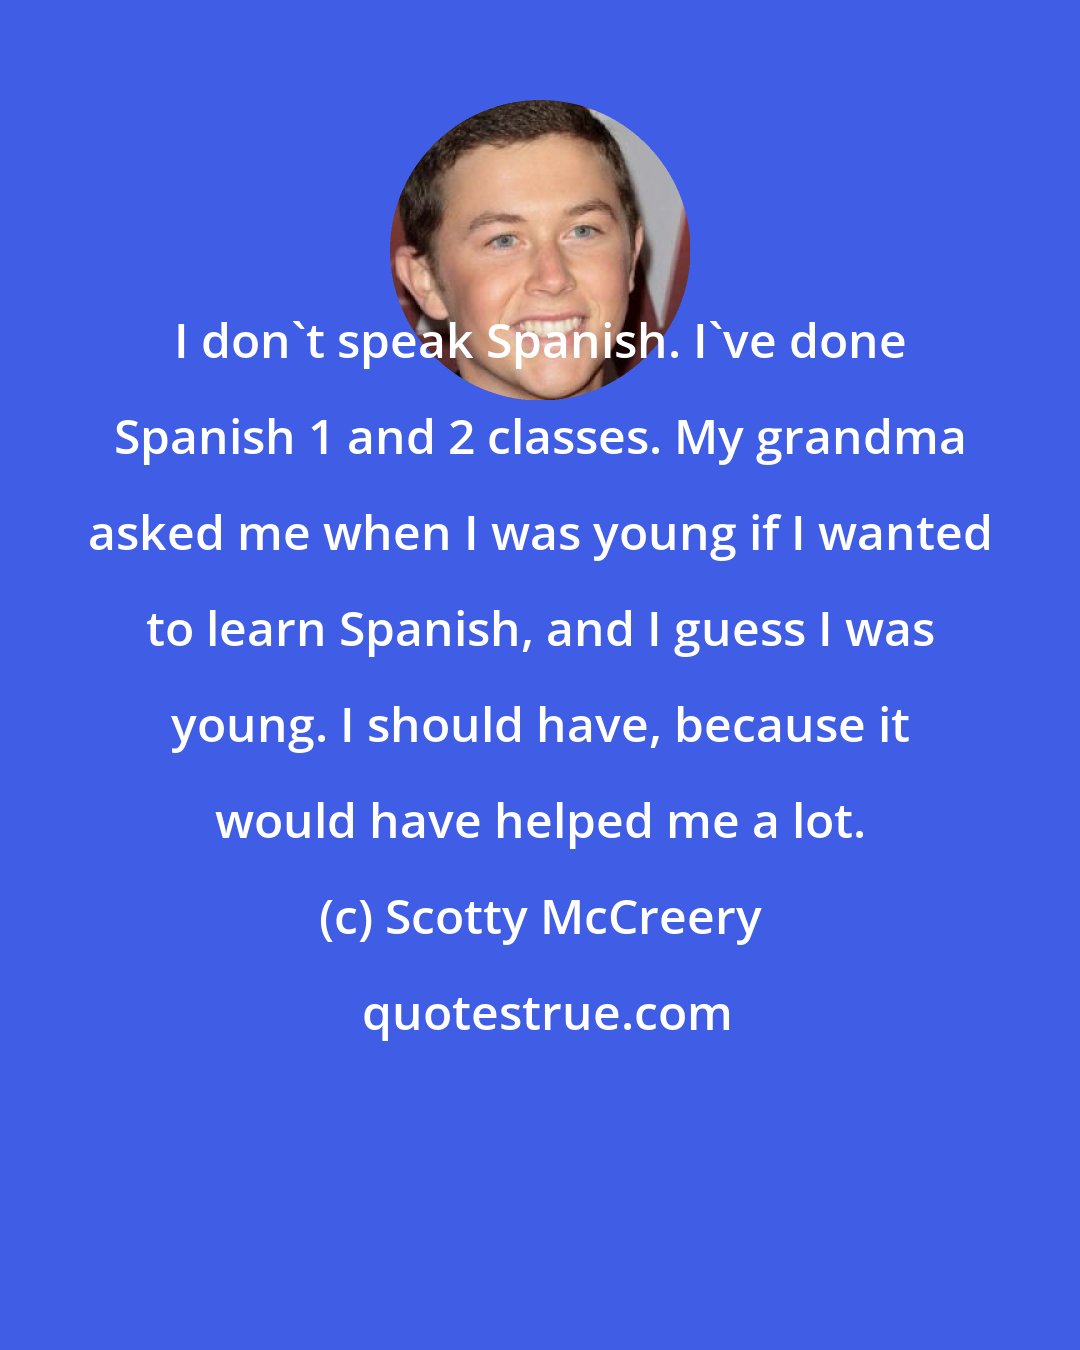 Scotty McCreery: I don't speak Spanish. I've done Spanish 1 and 2 classes. My grandma asked me when I was young if I wanted to learn Spanish, and I guess I was young. I should have, because it would have helped me a lot.